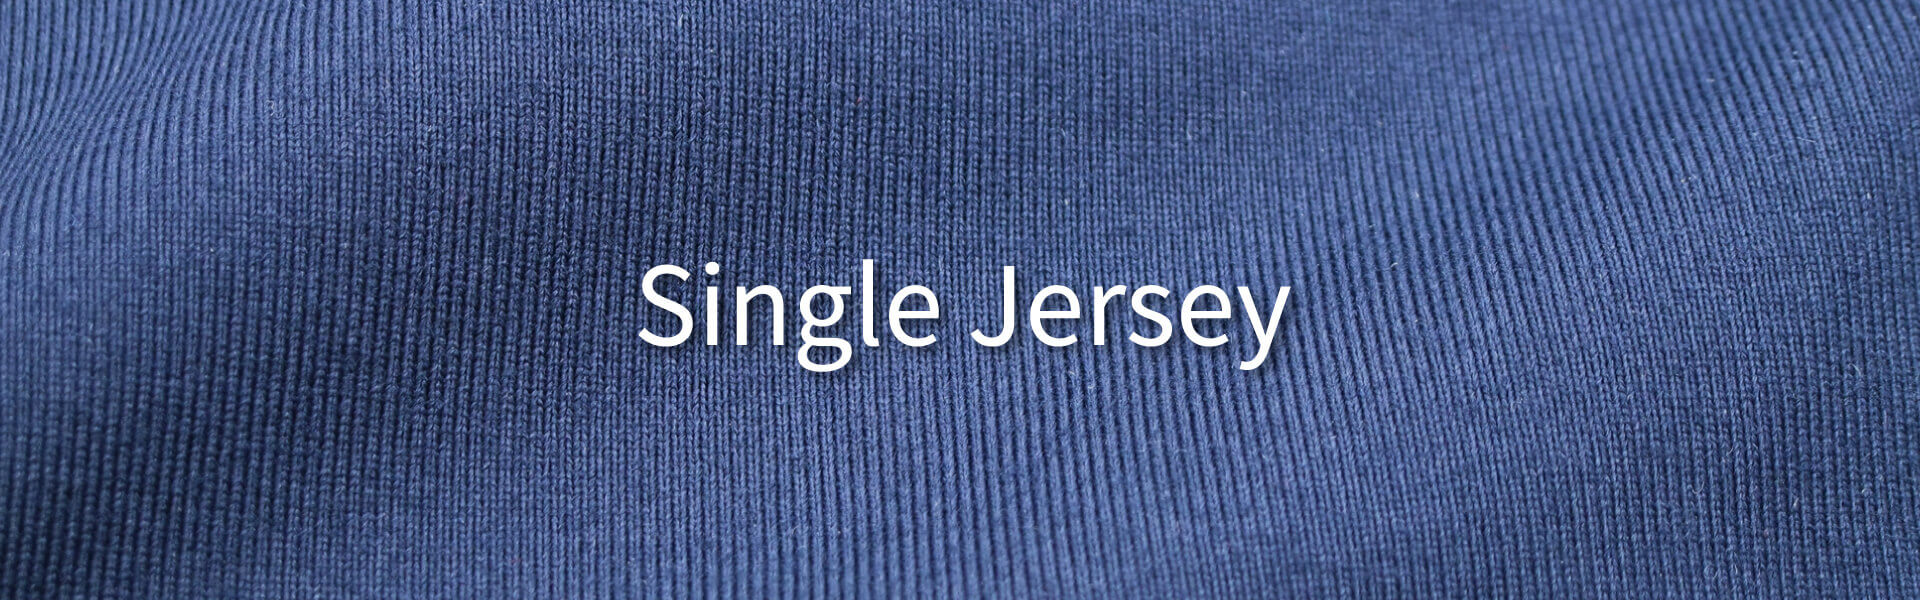 What is jersey fabric?